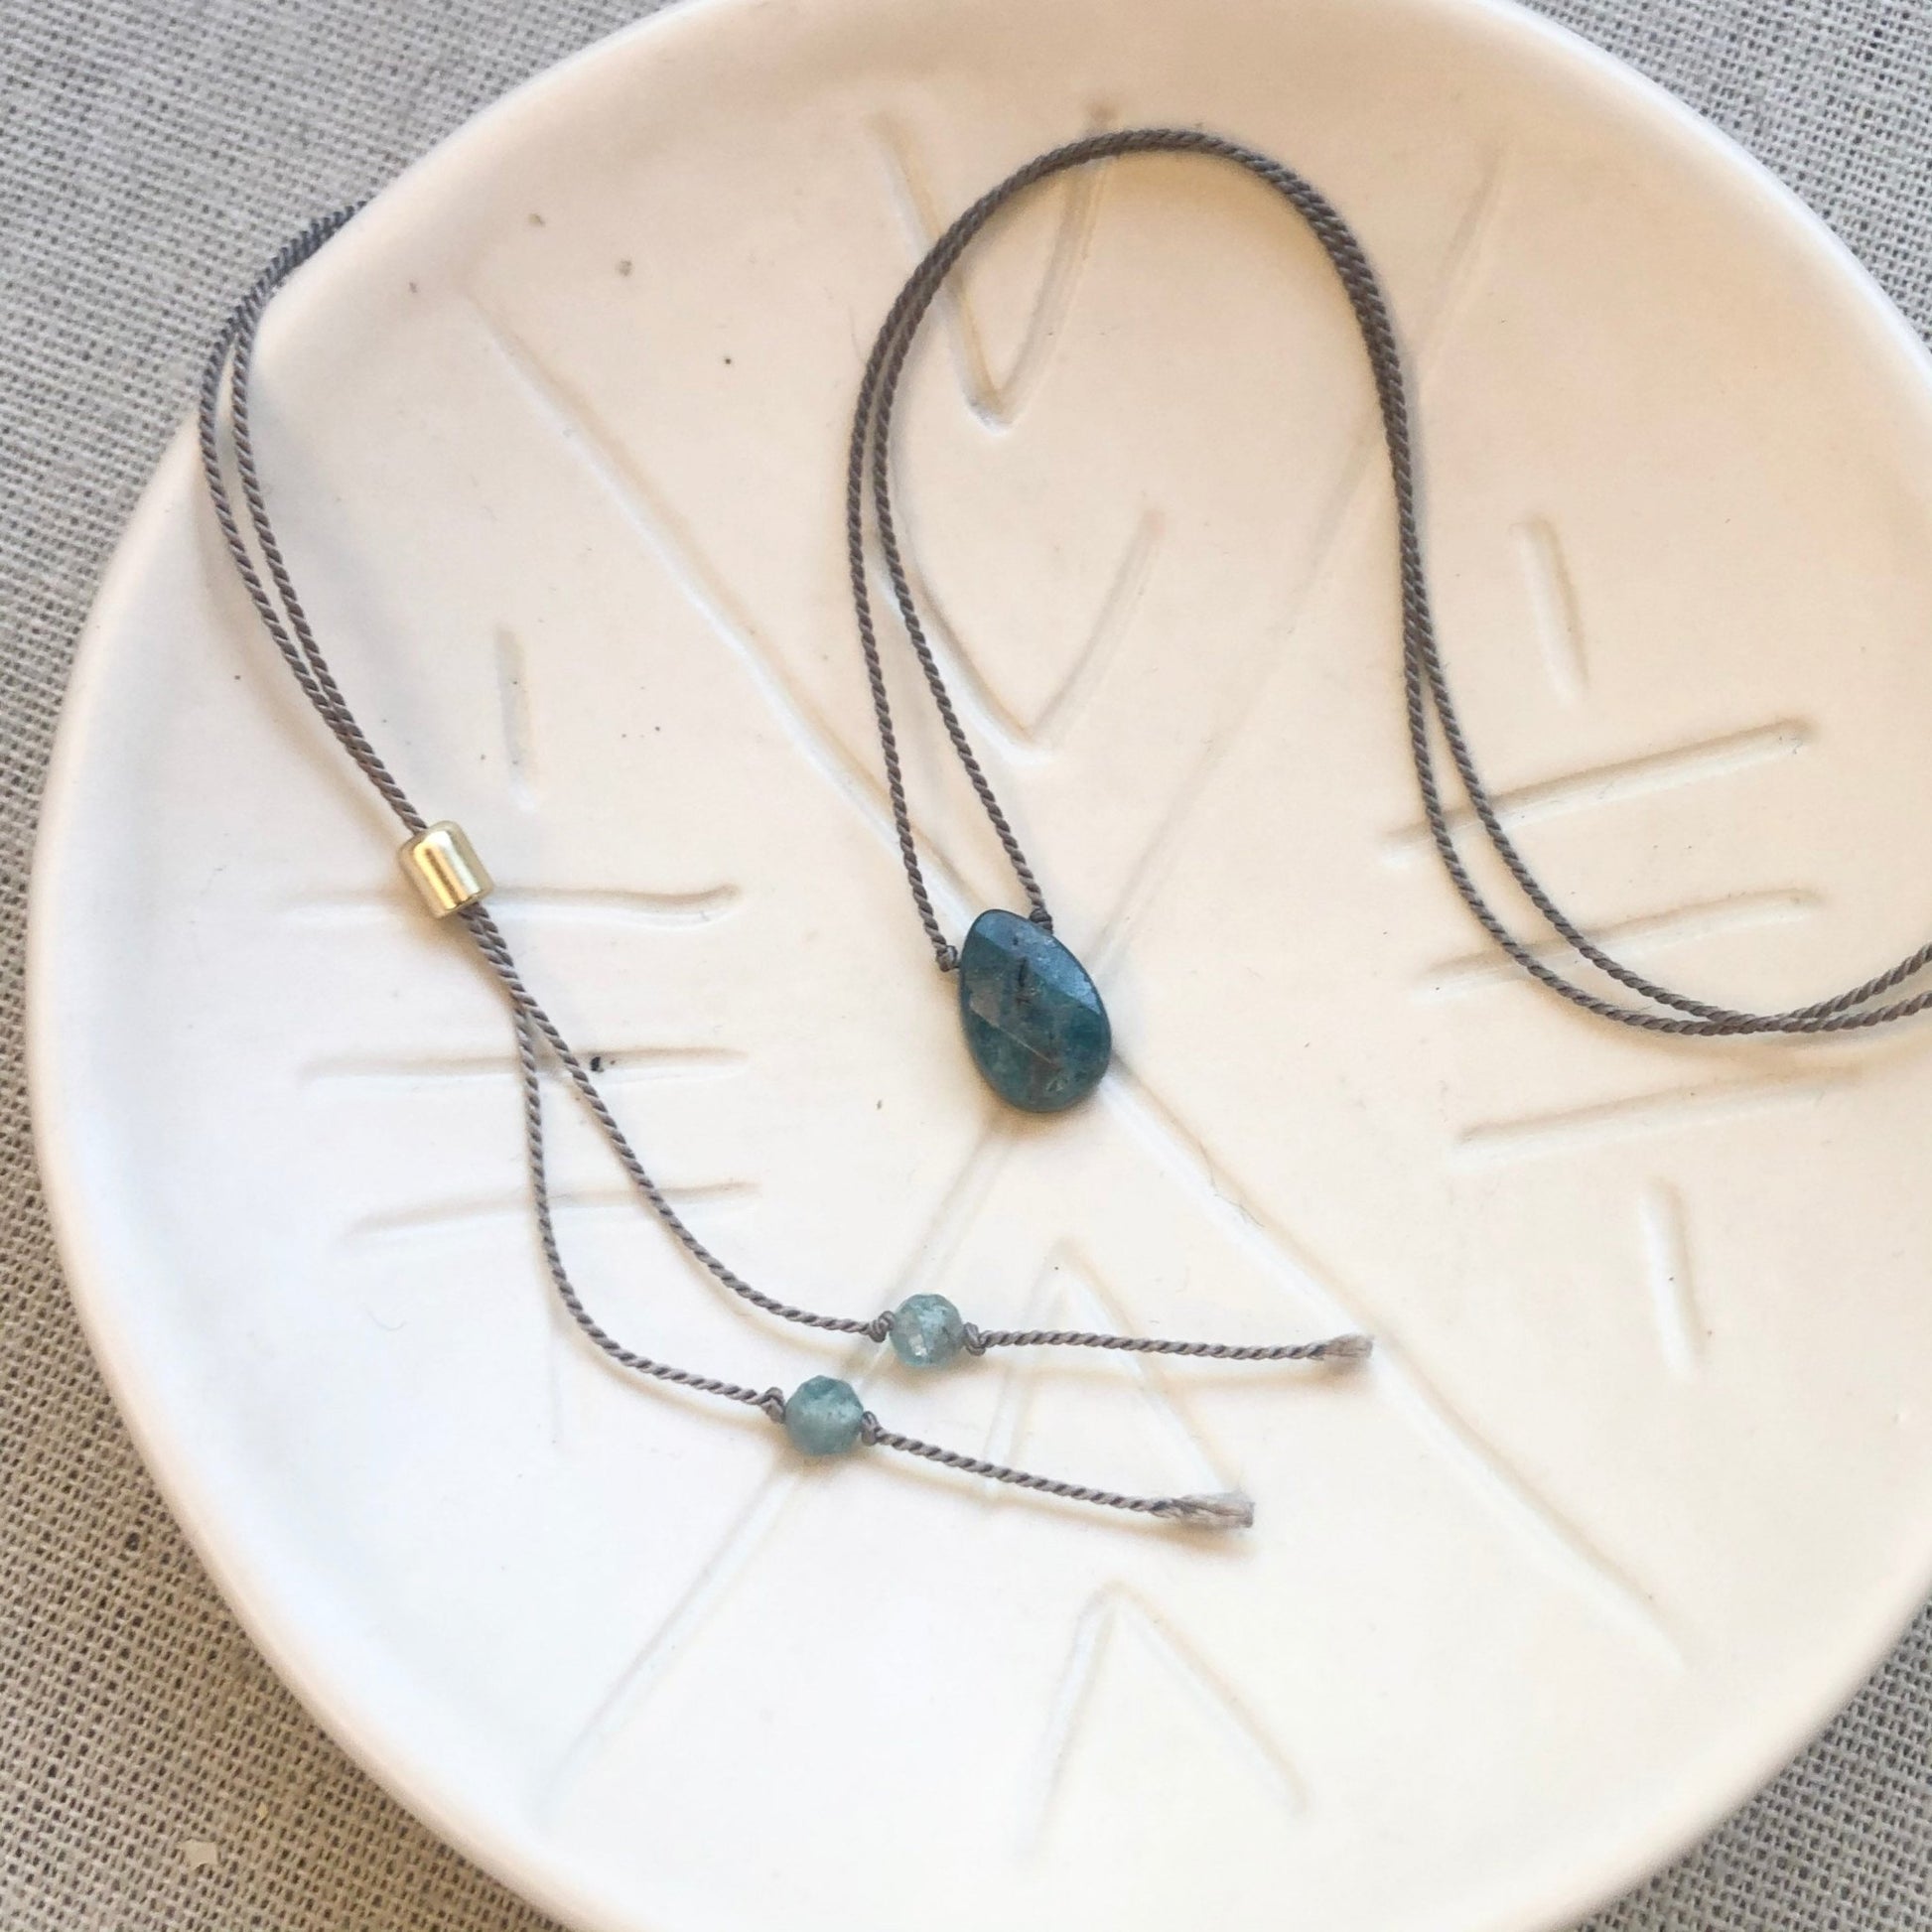 Crystal Intention Necklace - Apatite - Sunday Girl by Amy DiLamarraNecklace